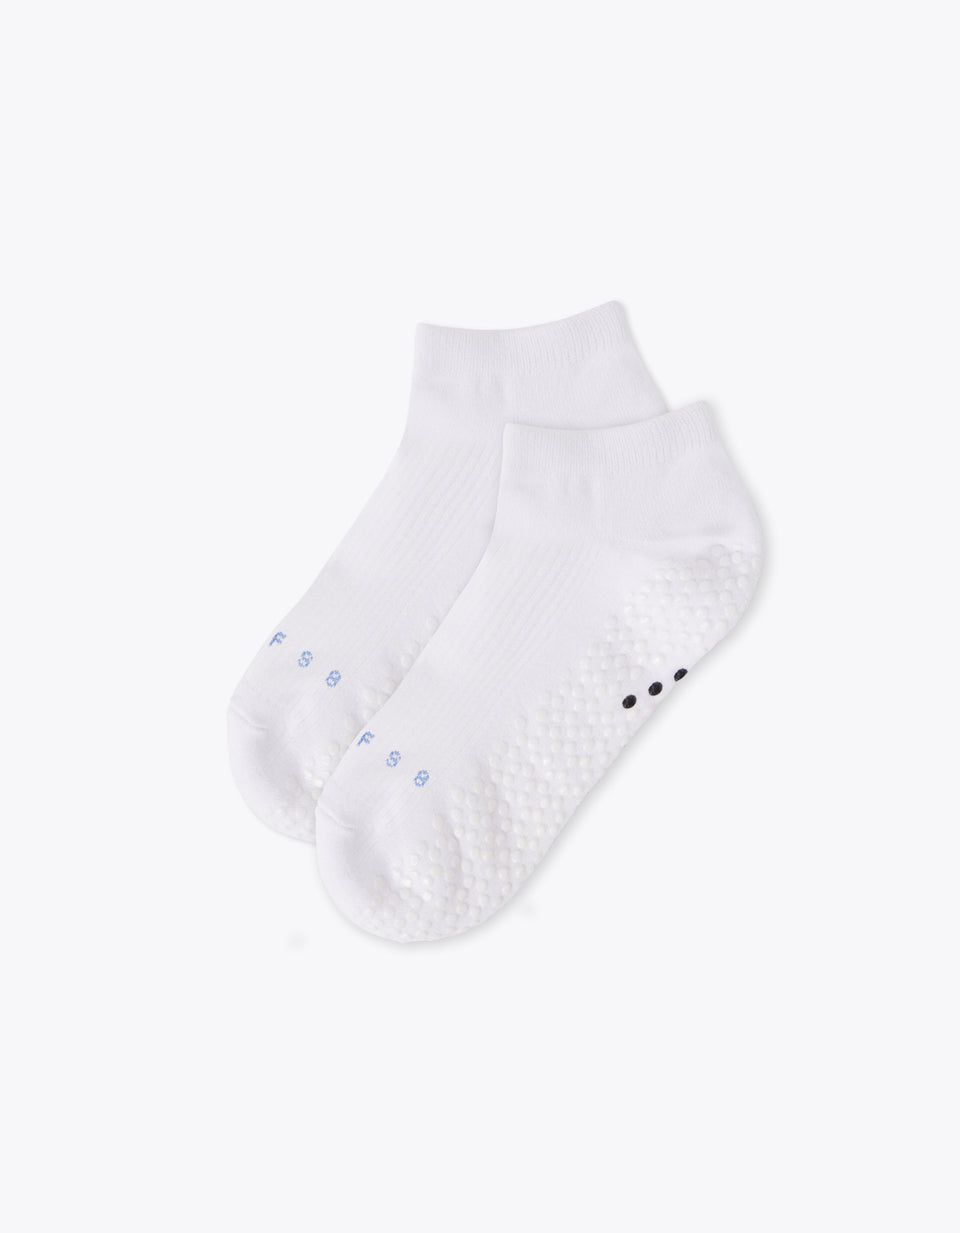 FS8 Accessories Ankle Grip Sock